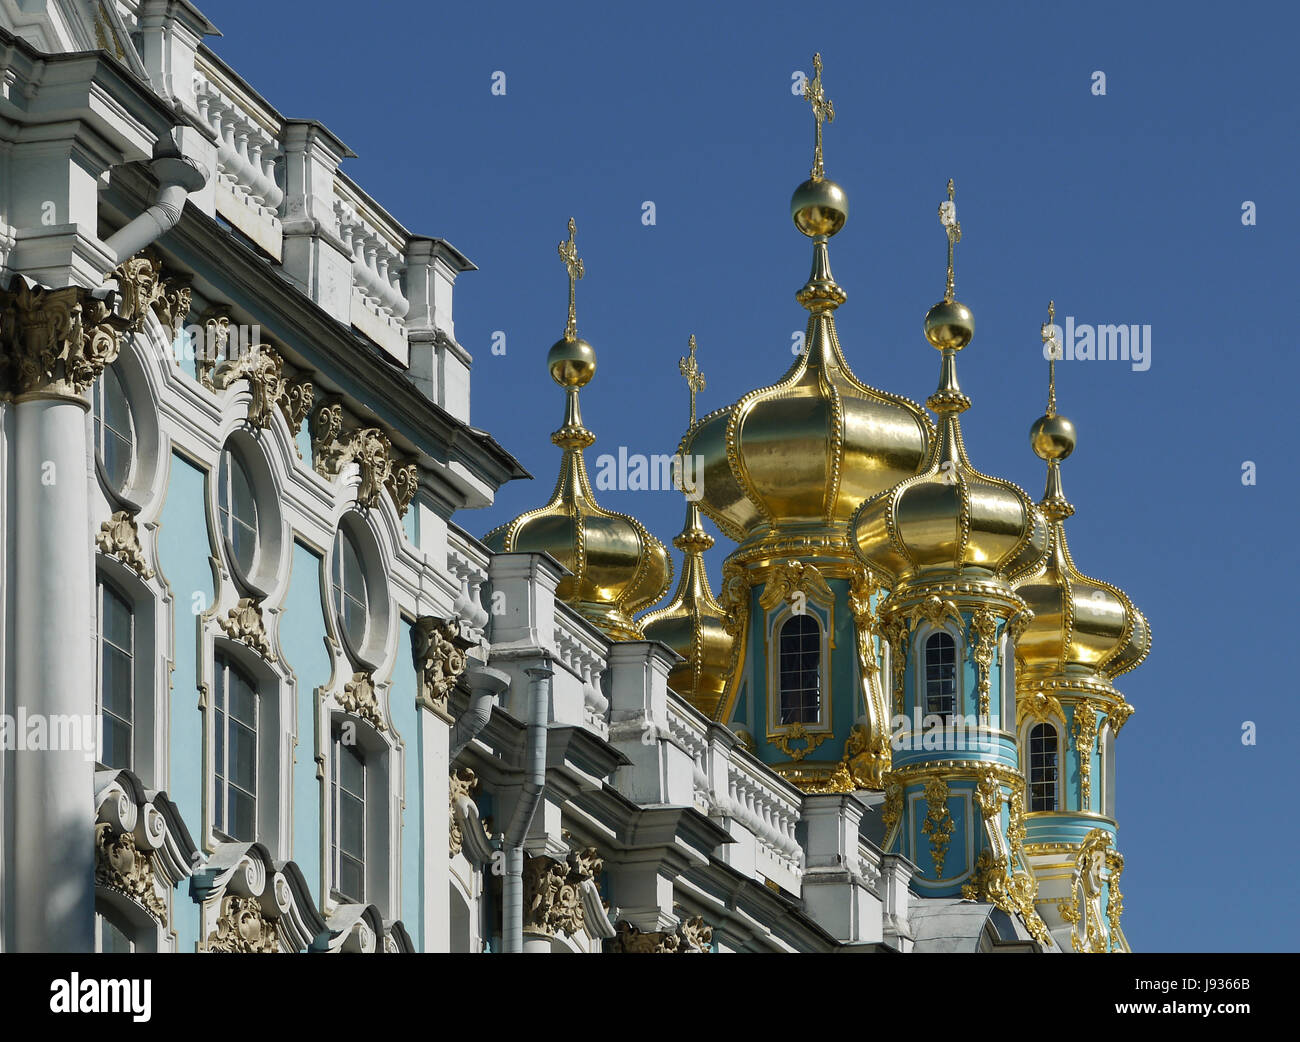 russia, sightseeing, gilt, hall, pageantry, style of construction, Stock Photo